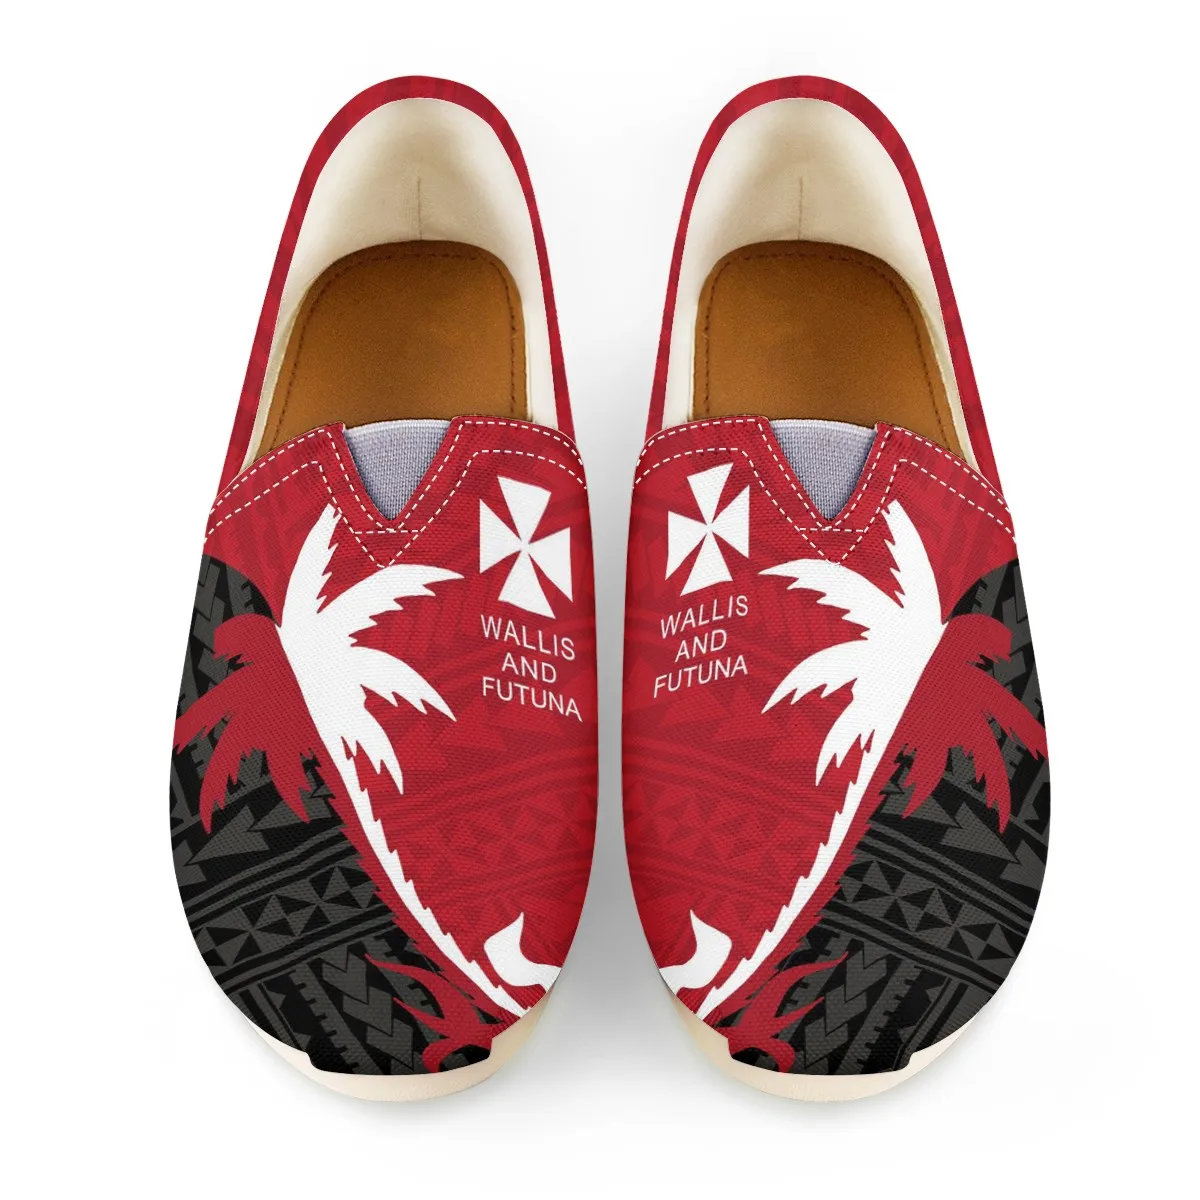 

Spring Summer Casual Shoe Polynesian Wallis And Futuna Printed Couple Flats Shoes Comfortable Slip On Canvas Shoes Women Loafers